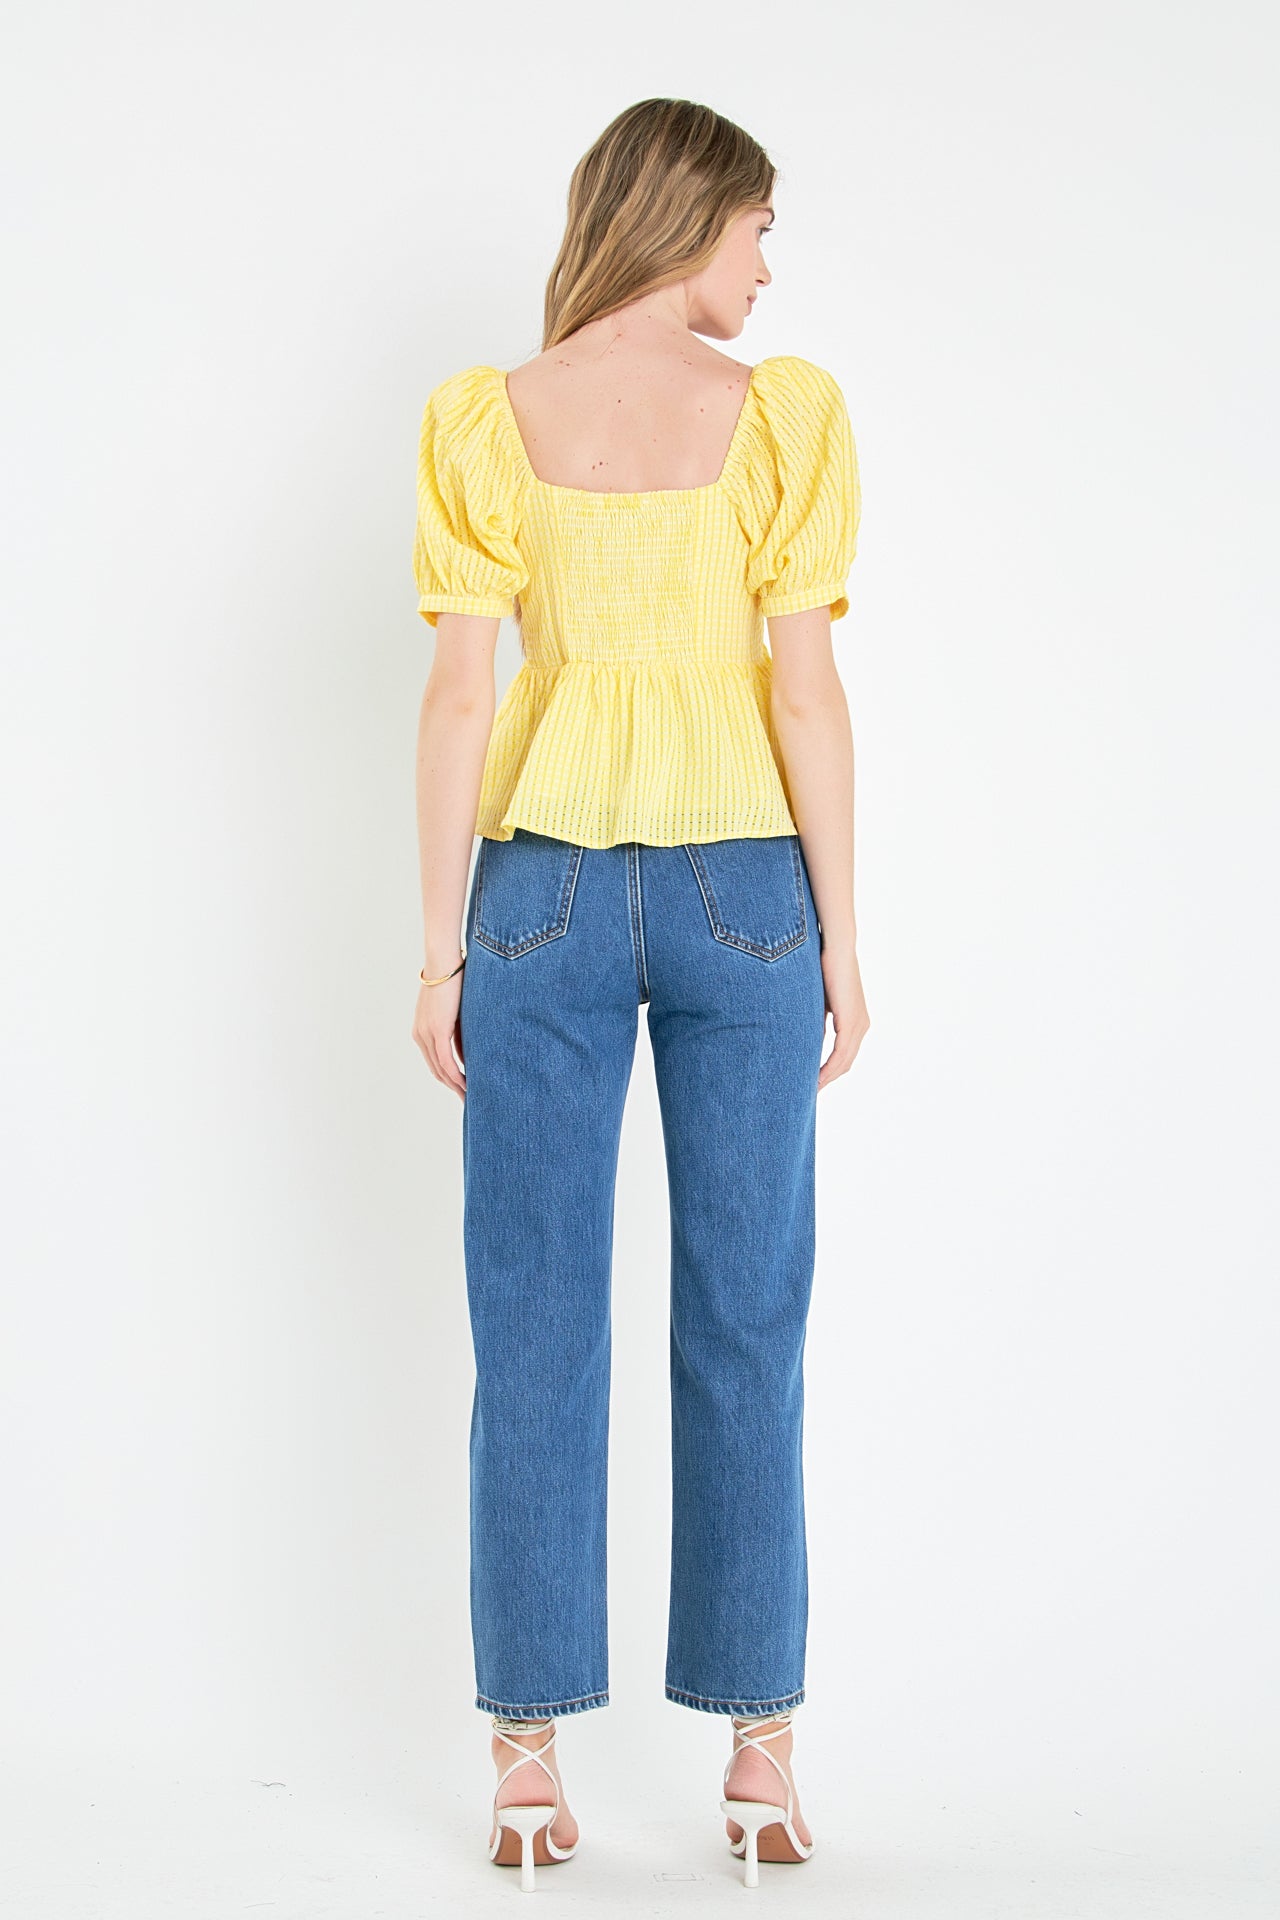 ENGLISH FACTORY - Check Print Puff Sleeve Top - TOPS available at Objectrare